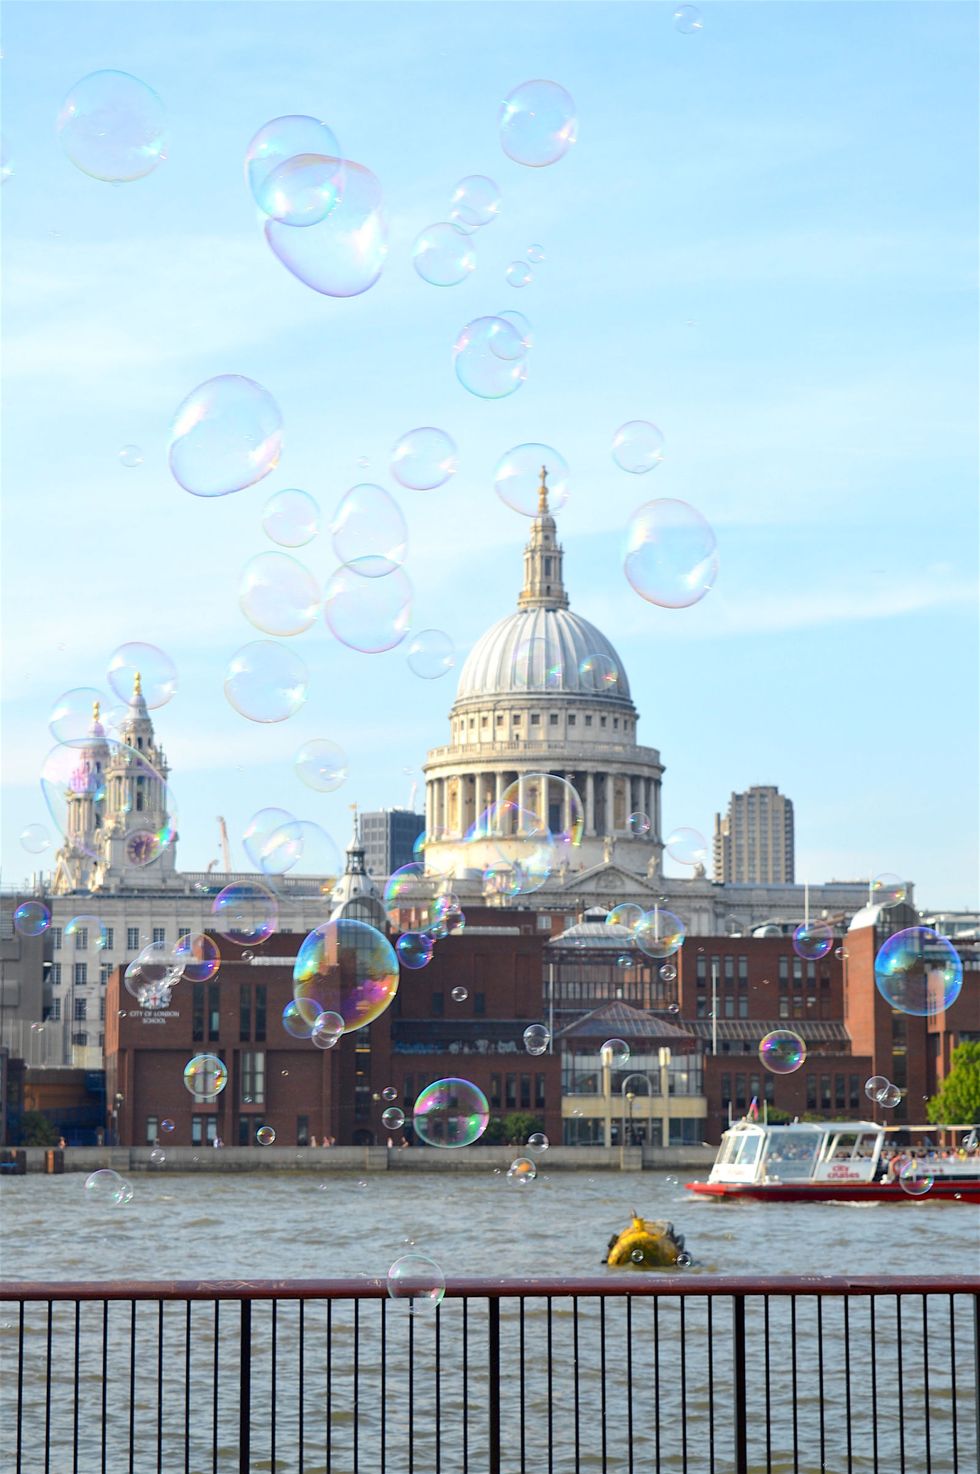 <p>This is the beautiful Saint Paul's Cathedral captured from the Southbank of the River Thames. The cathedral is one of the most famous and most recognizable sights in London and its dome has been dominating London's skyline for 300 years.   </p>